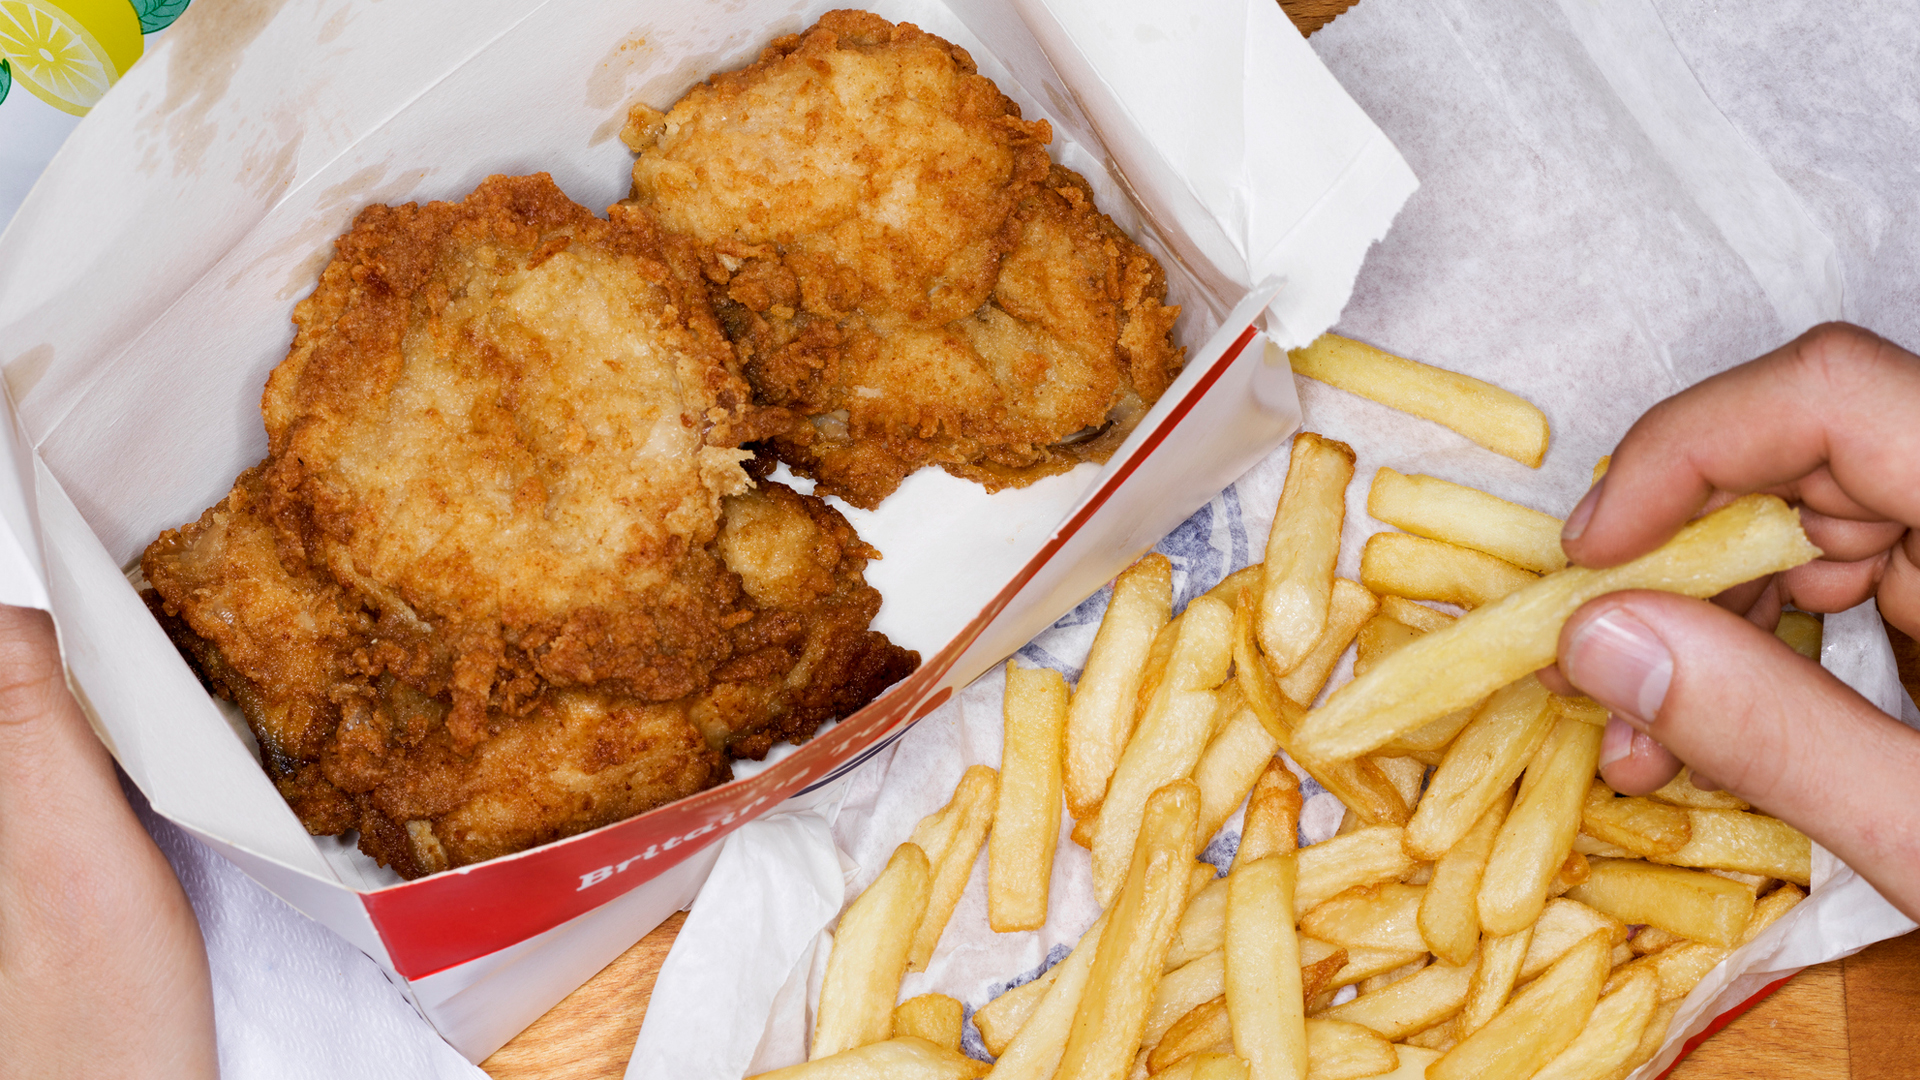 Fried chicken and French fries